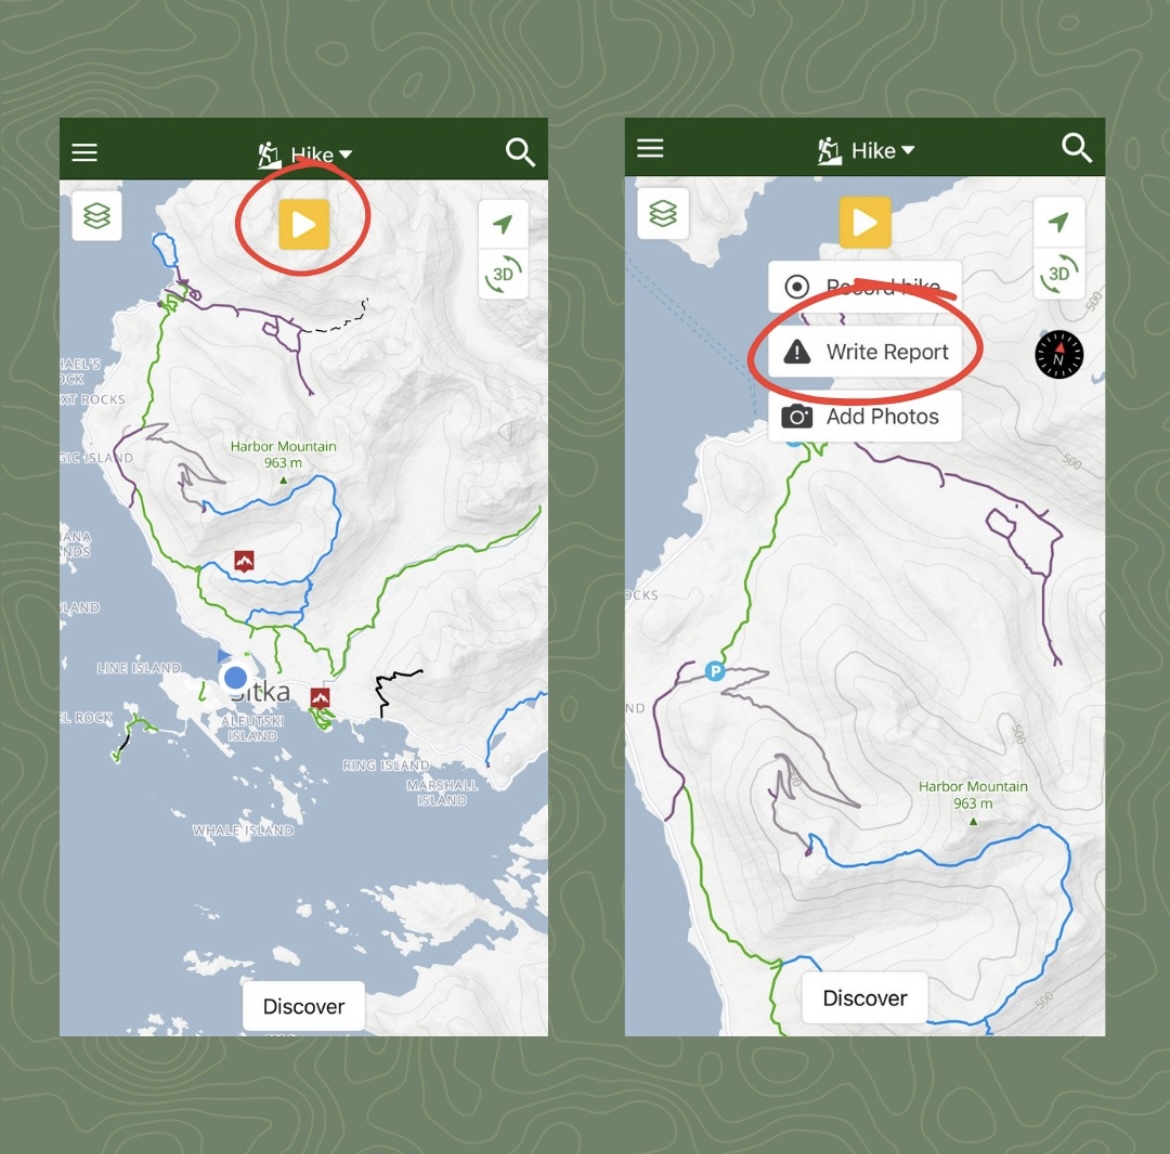 This photo shows the steps to reporting a trail issue "Press the yellow arrow button on the top of your screen" and "Press 'Write Report'" in the Trail Forks app